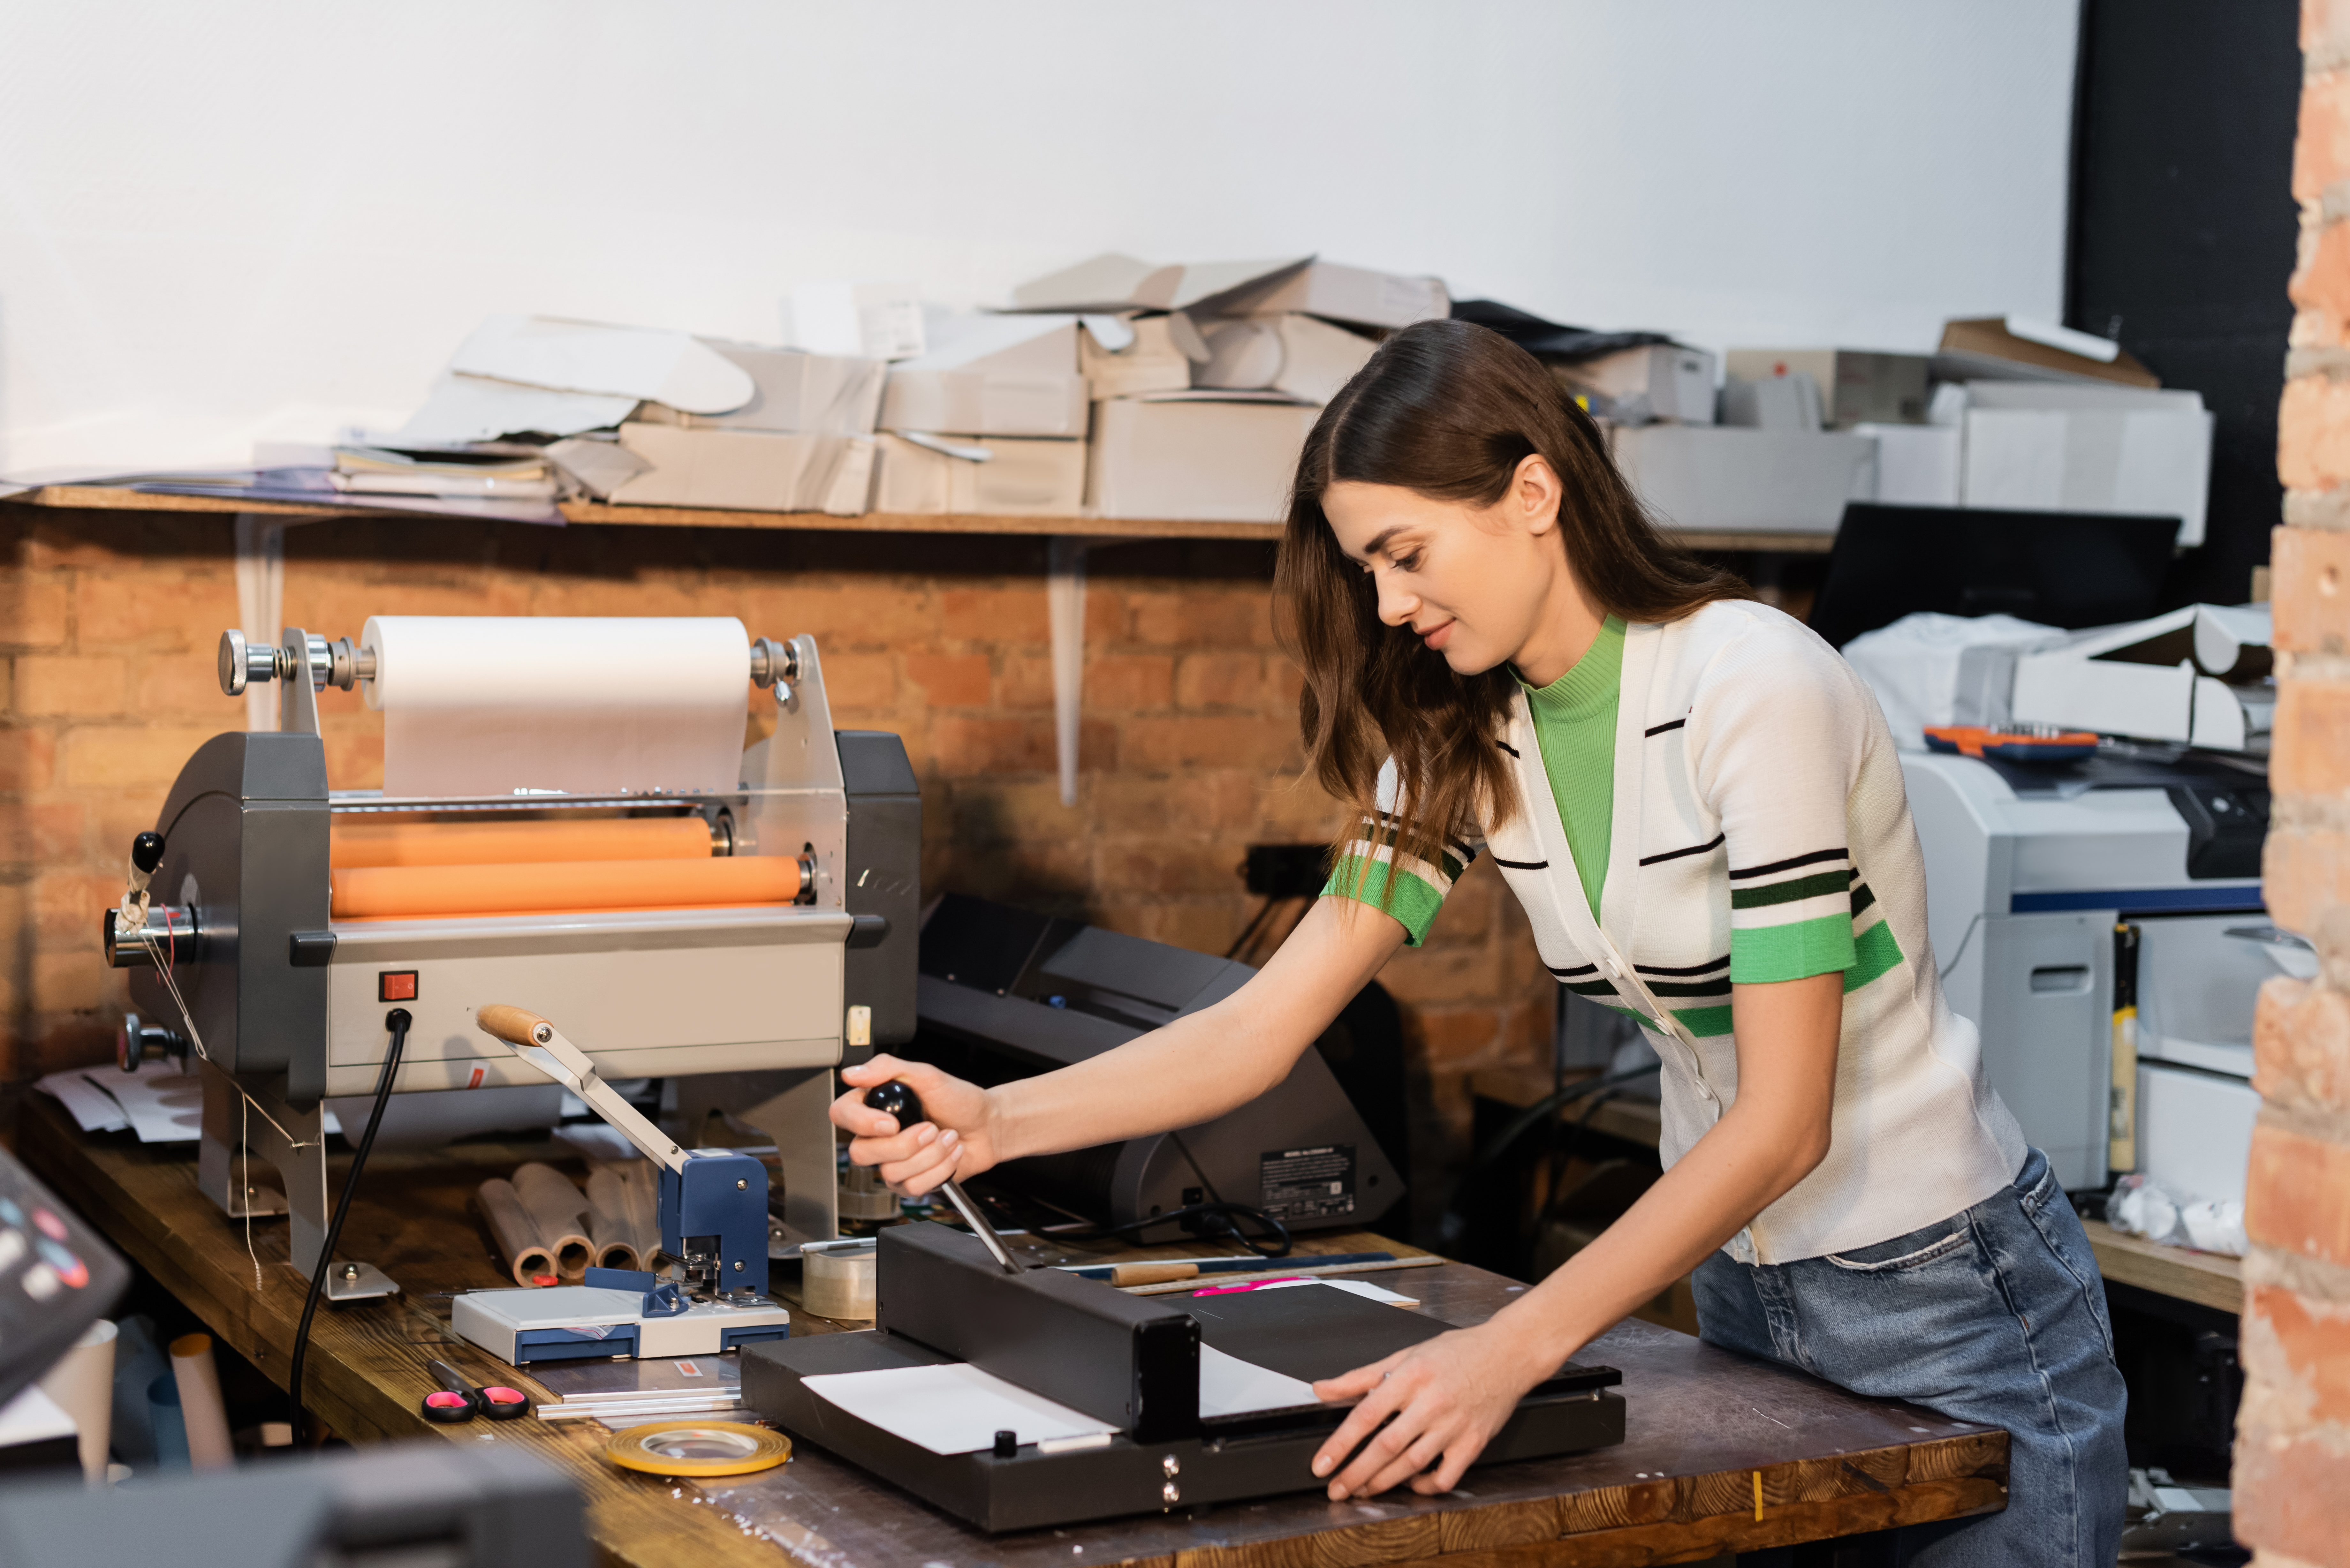 Green Printing: Tips for Eco-Friendly Printing at Home and in the Office